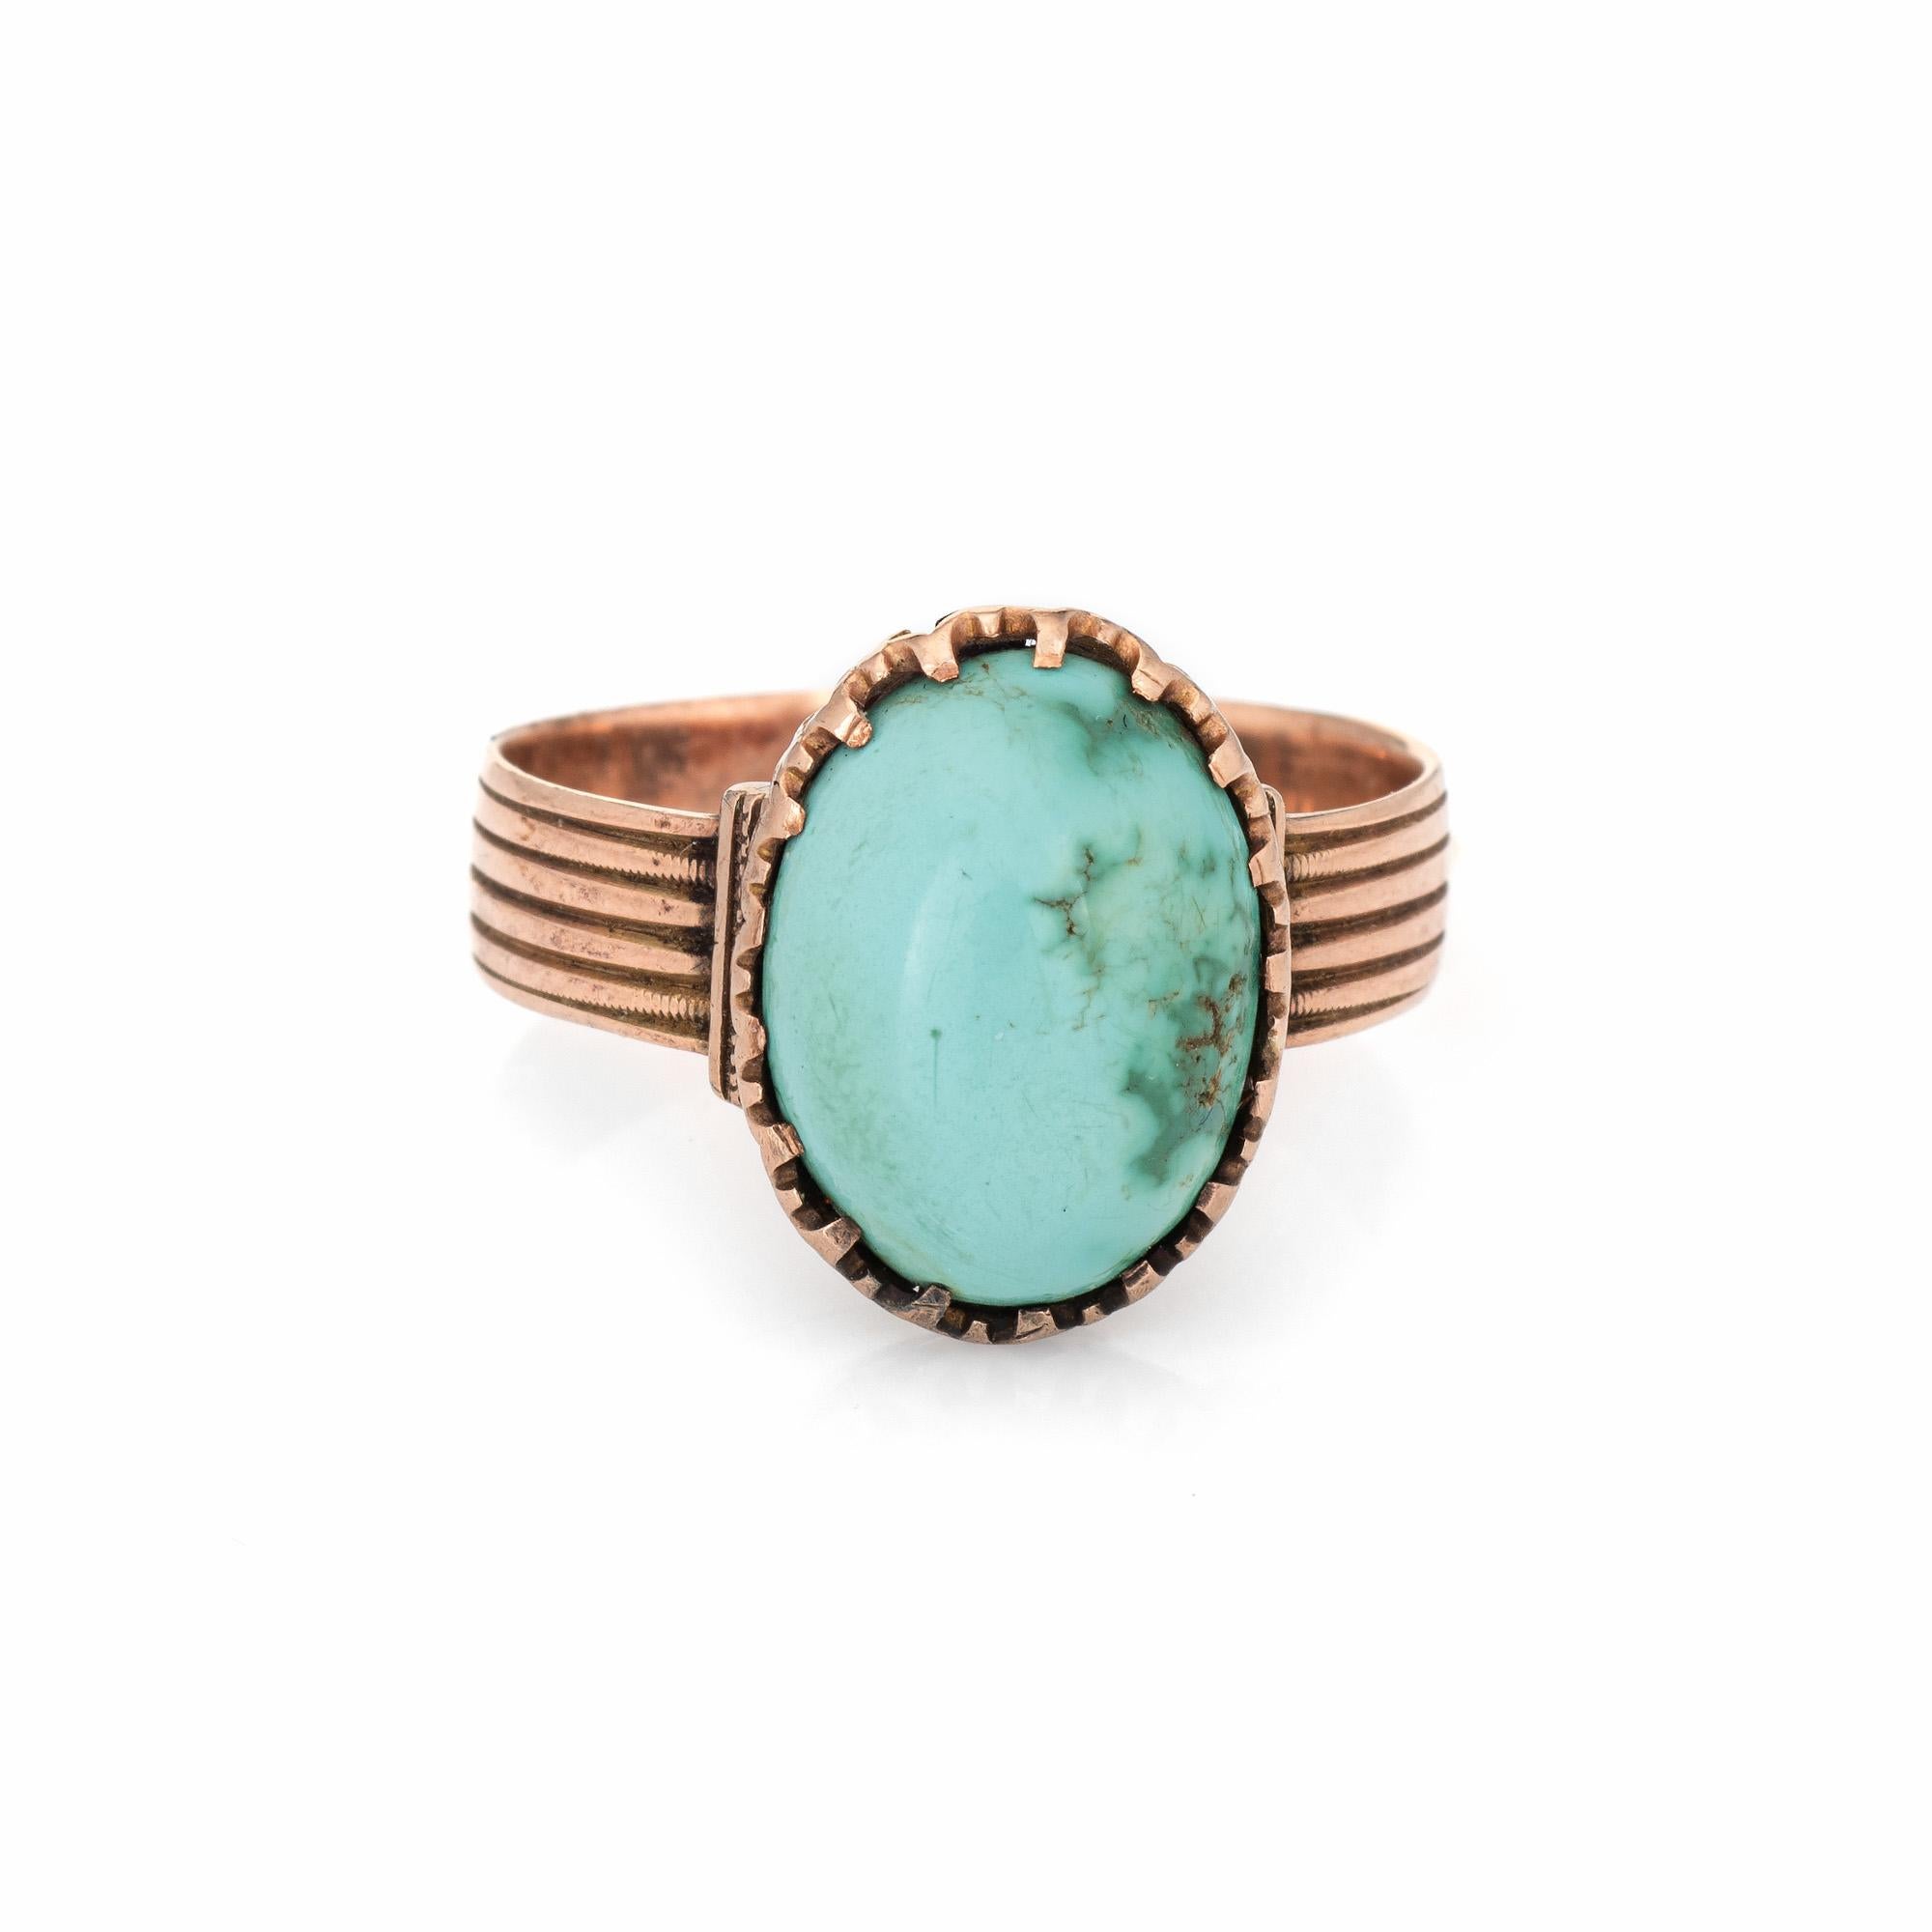 Elegant antique Victorian era turquoise ring (circa 1880s to 1900s), crafted in 10 karat rose gold. 

The turquoise measures 12mm x 10mm (estimated at 4 carats). Note: color variance to the turquoise (inherent to the stone).
The cabochon cut